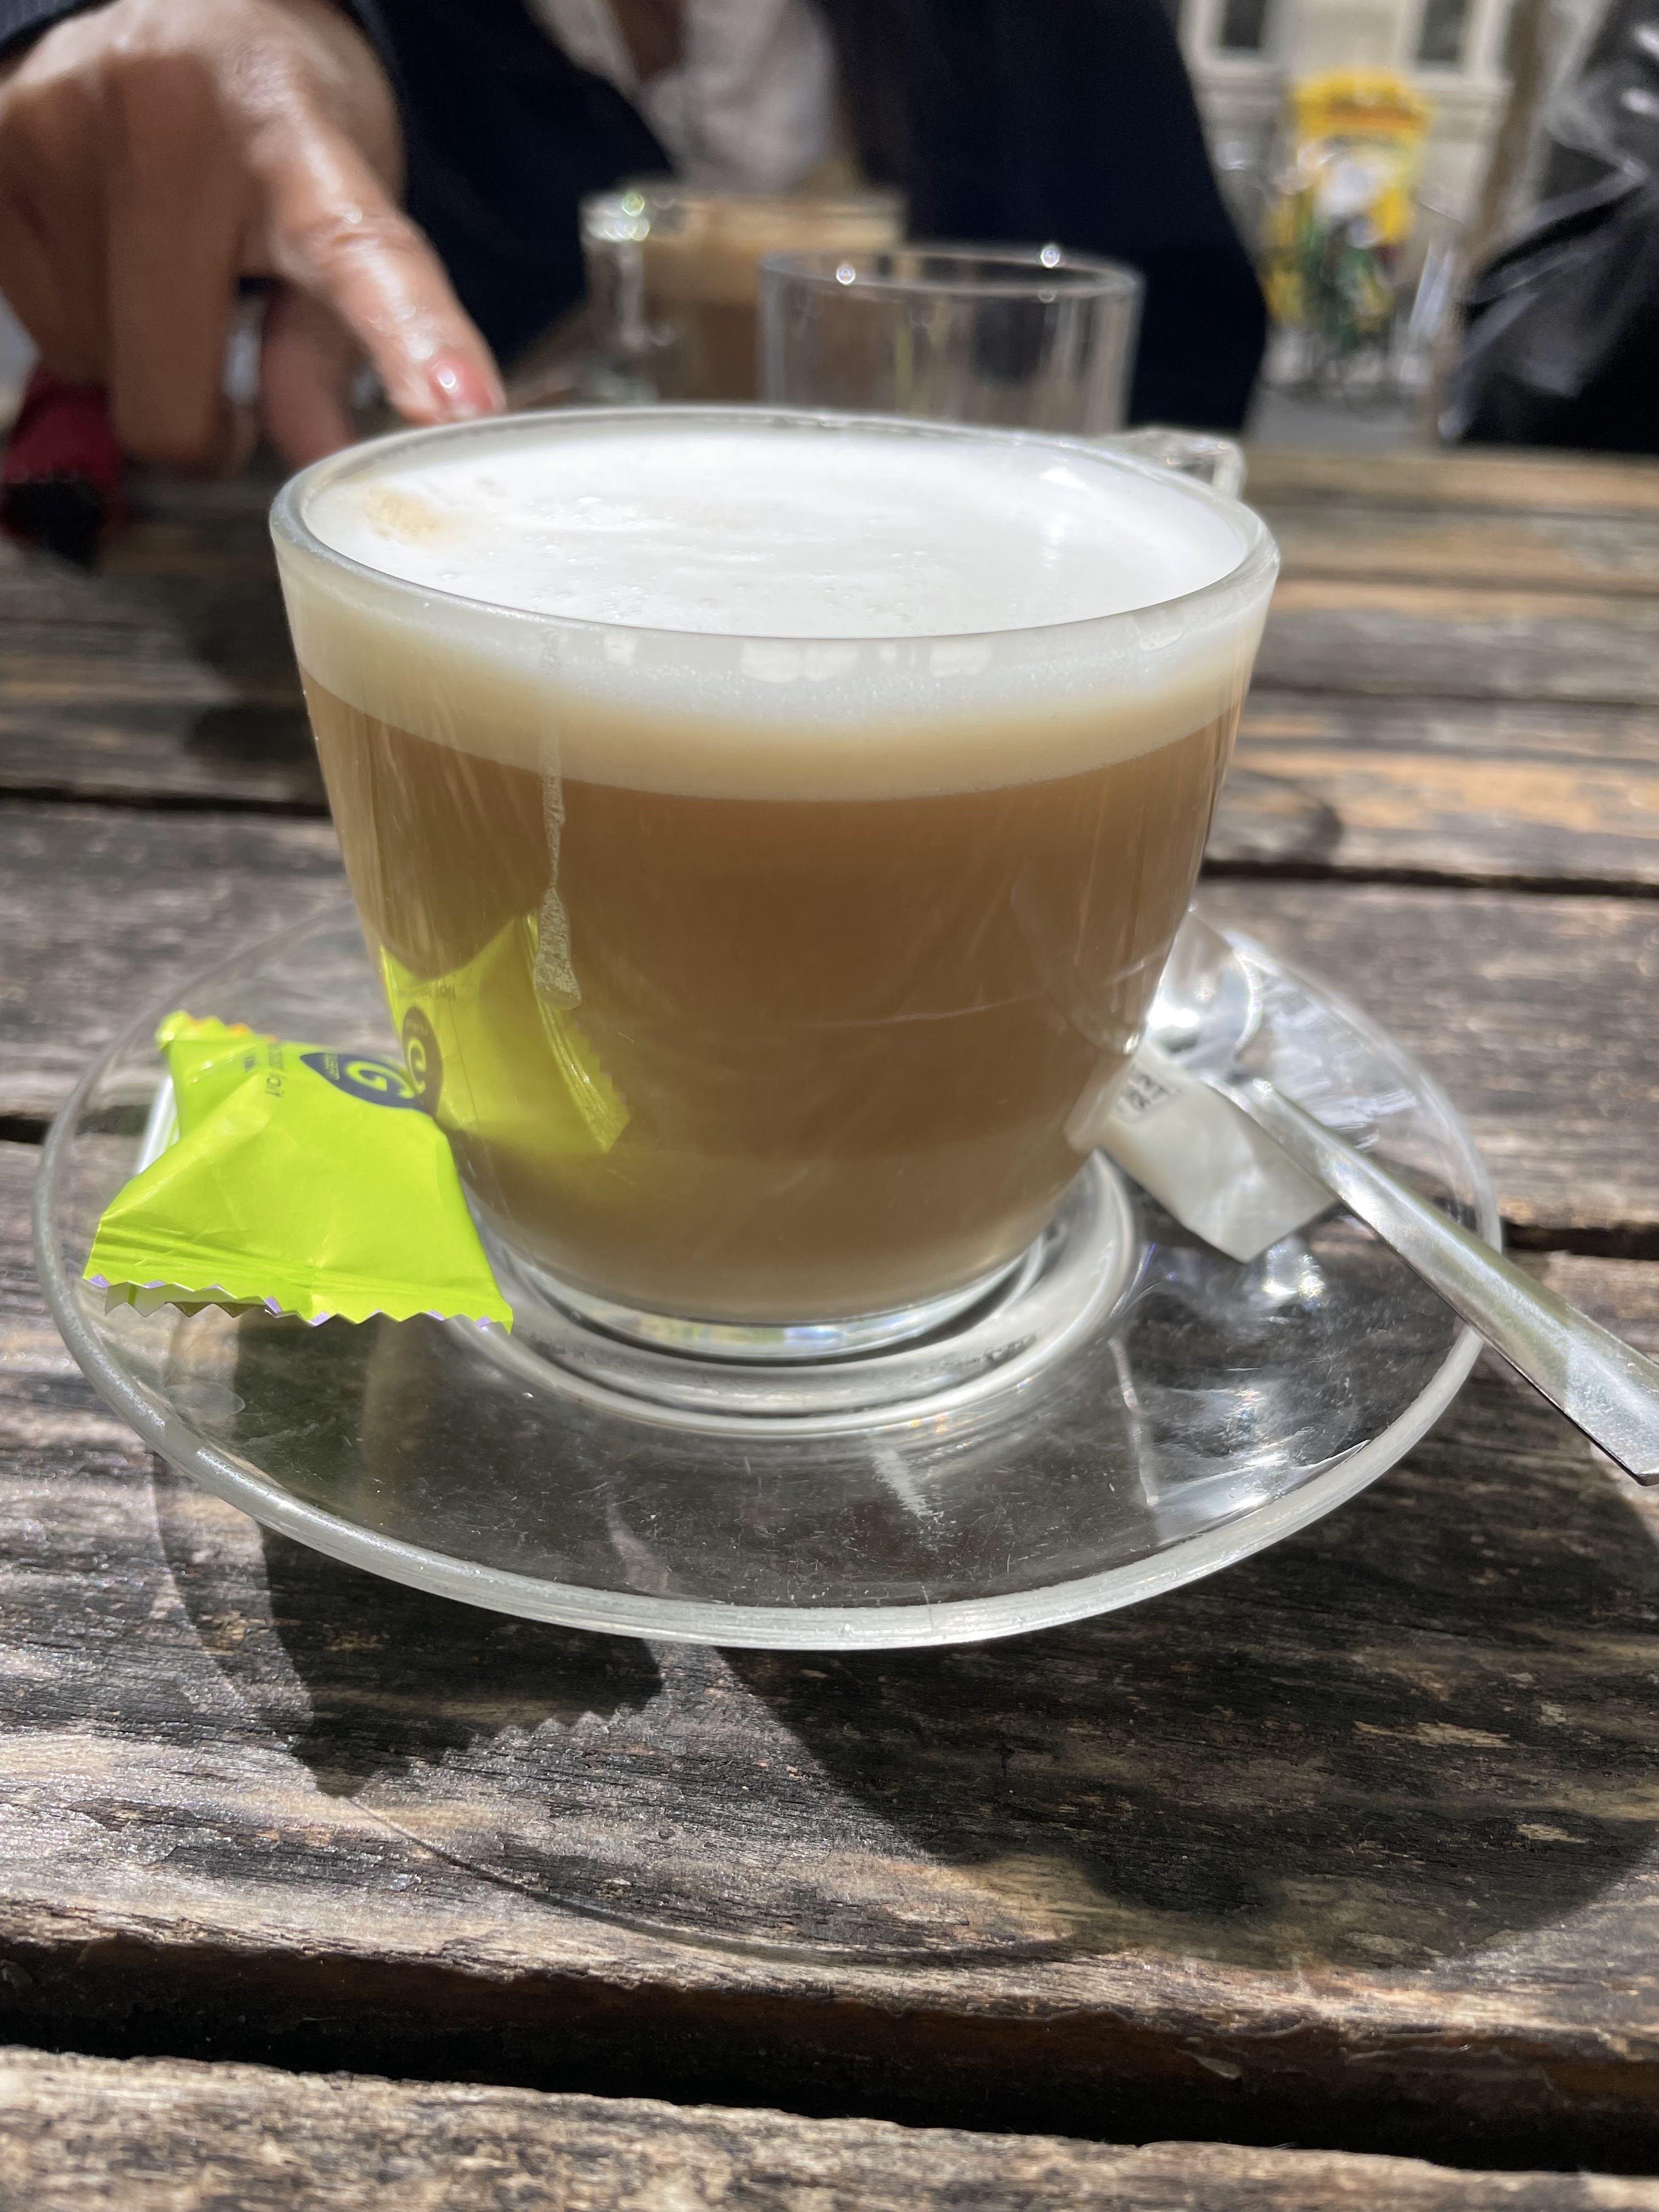 A perfectly made cappuccino, with a layer of espresso, milk, and foam, from a café in France